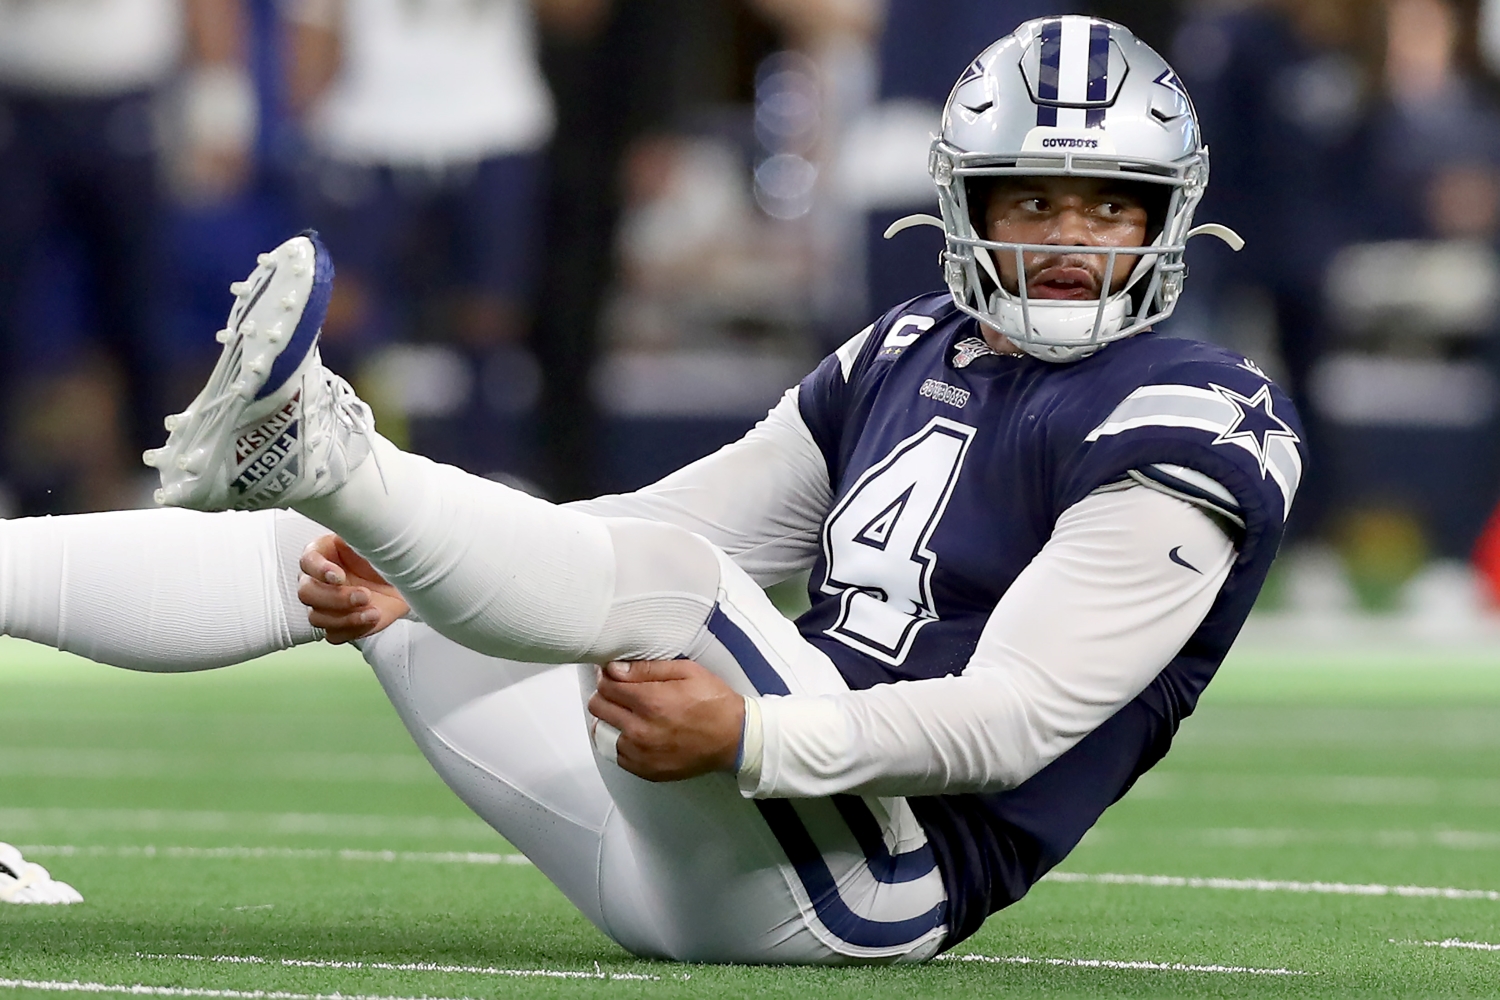 Dak Prescott of the Dallas Cowboys reacts after being knocked to the turf against the Los Angeles Rams.